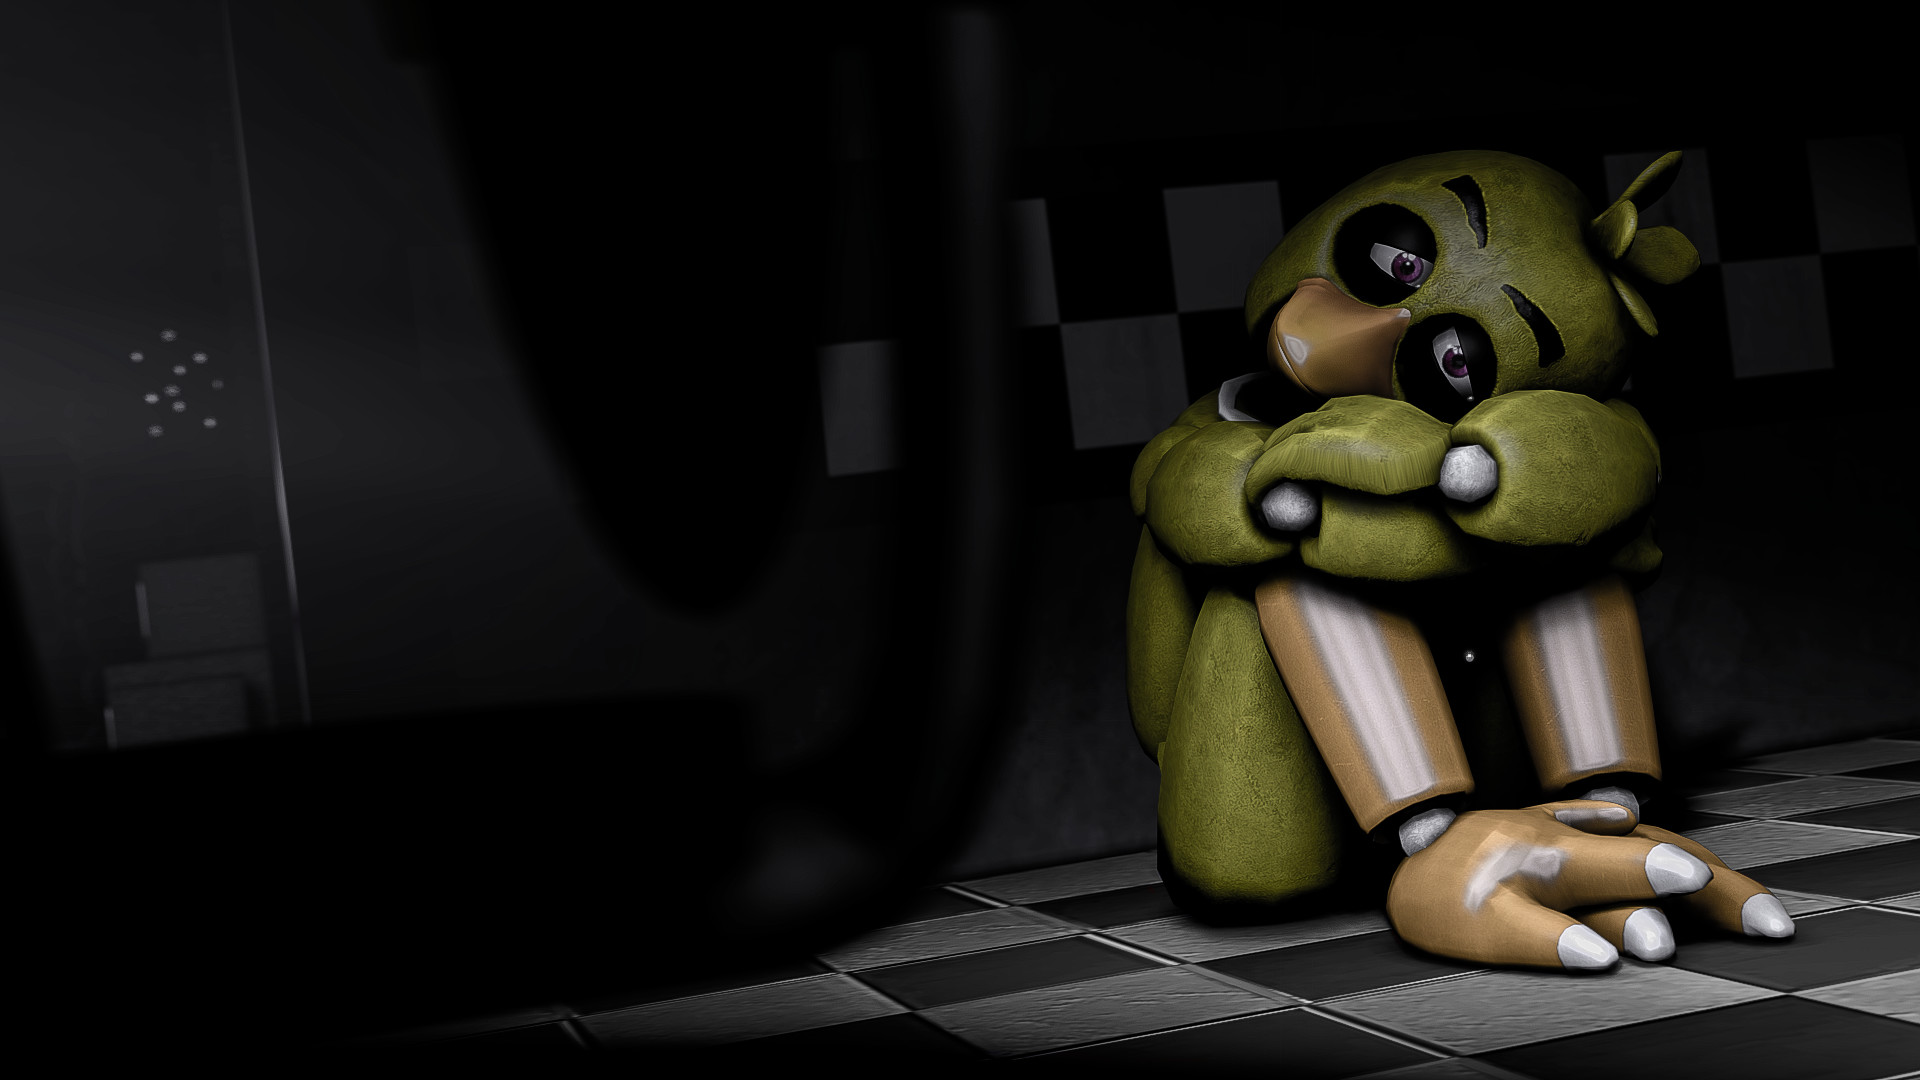 Now I live with regret SFM Wallpaper by gold94chica on DeviantArt